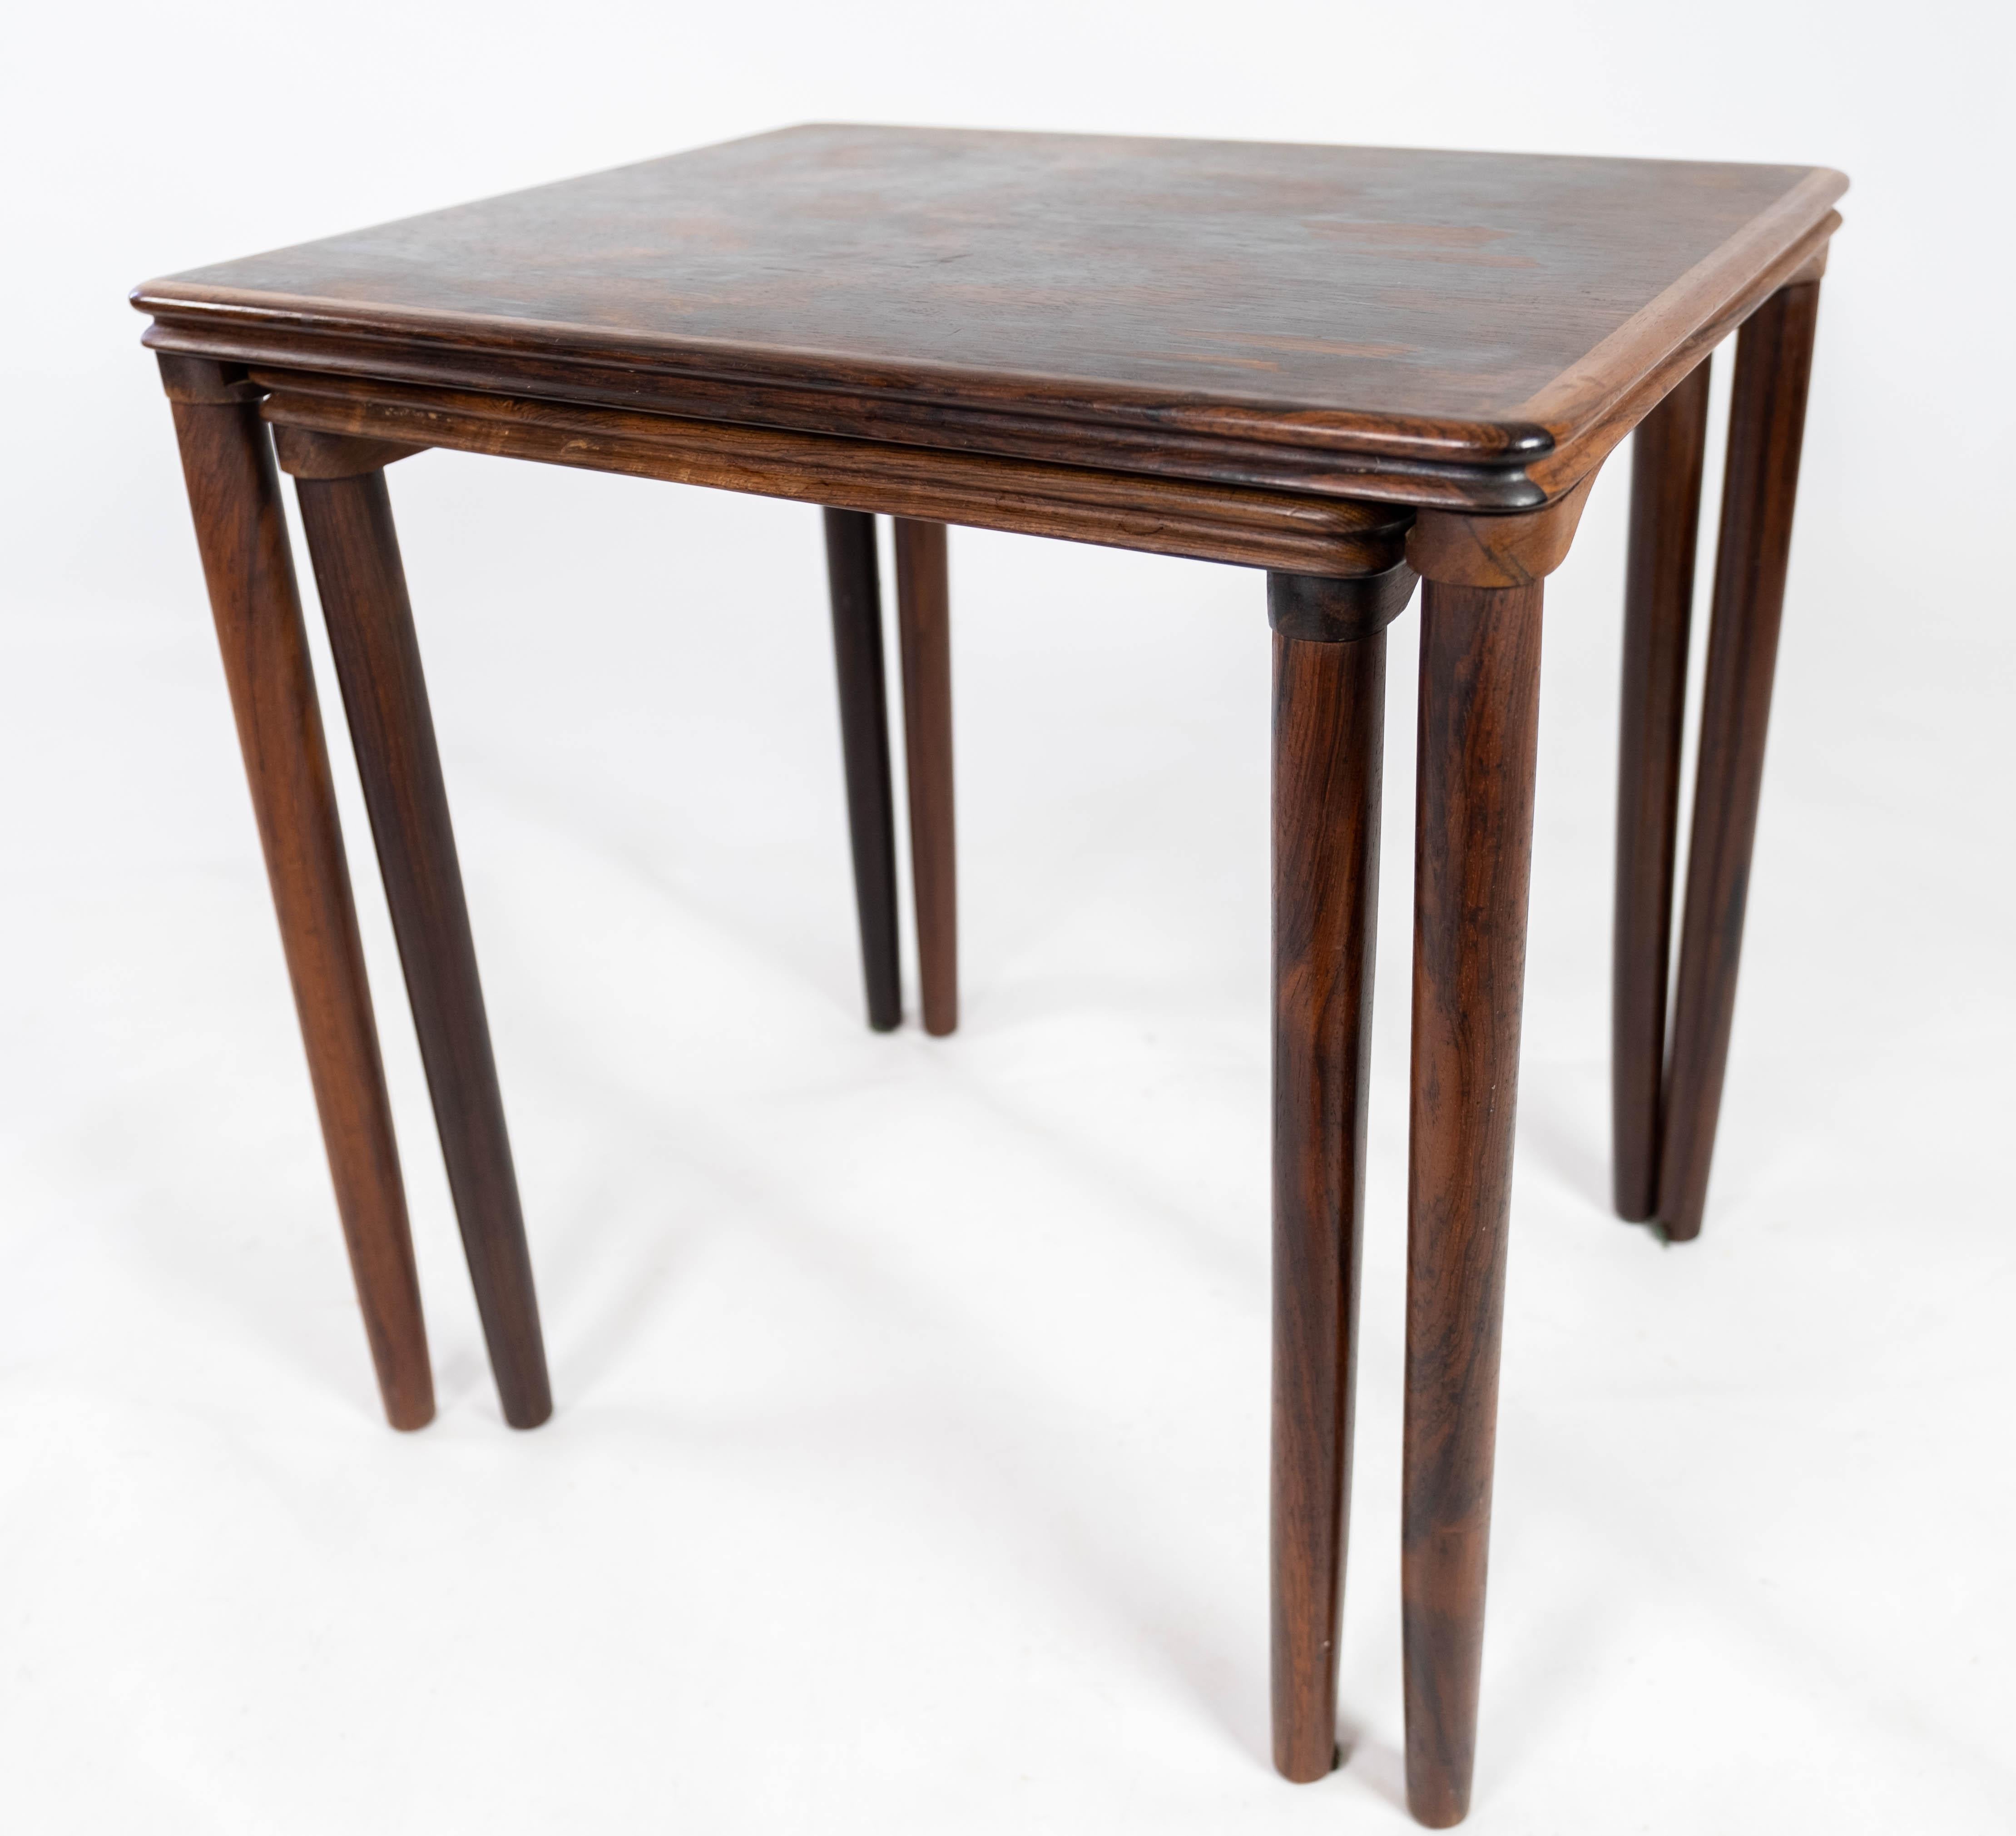 Nesting Tables in Rosewood of Danish Design from the 1960s For Sale 1